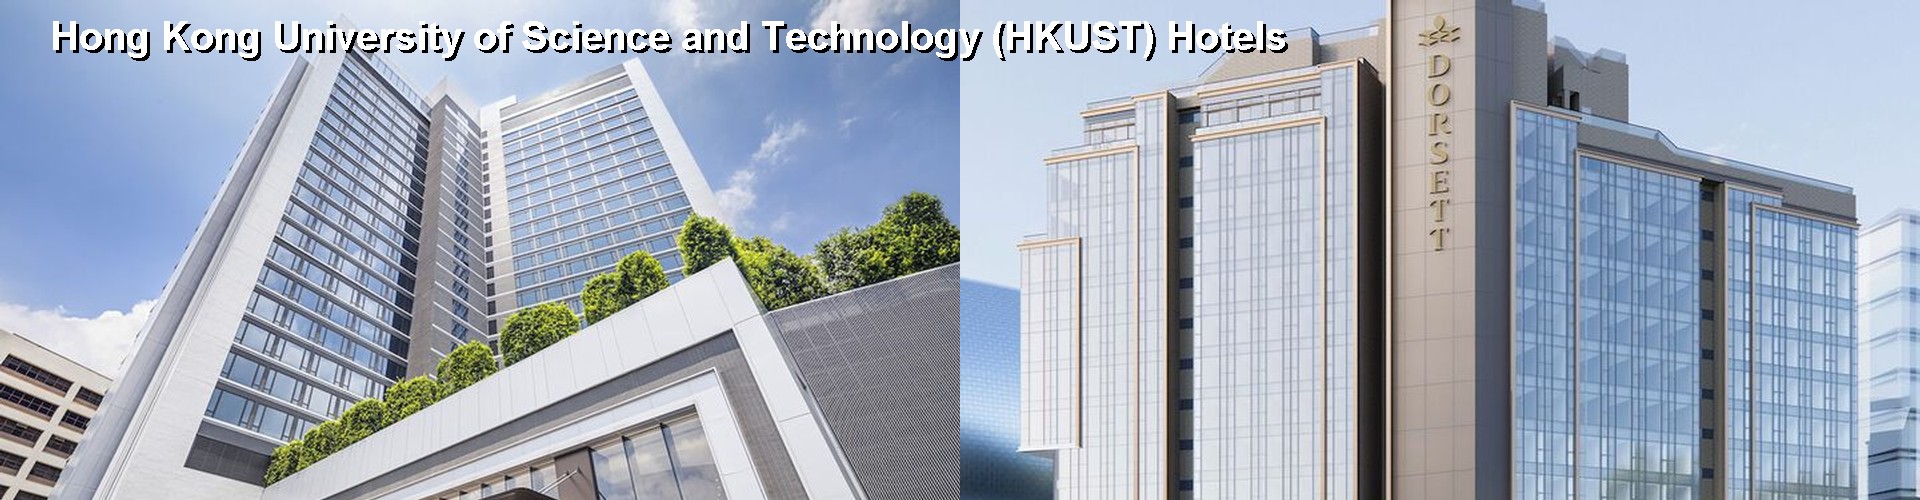 5 Best Hotels near Hong Kong University of Science and Technology (HKUST)